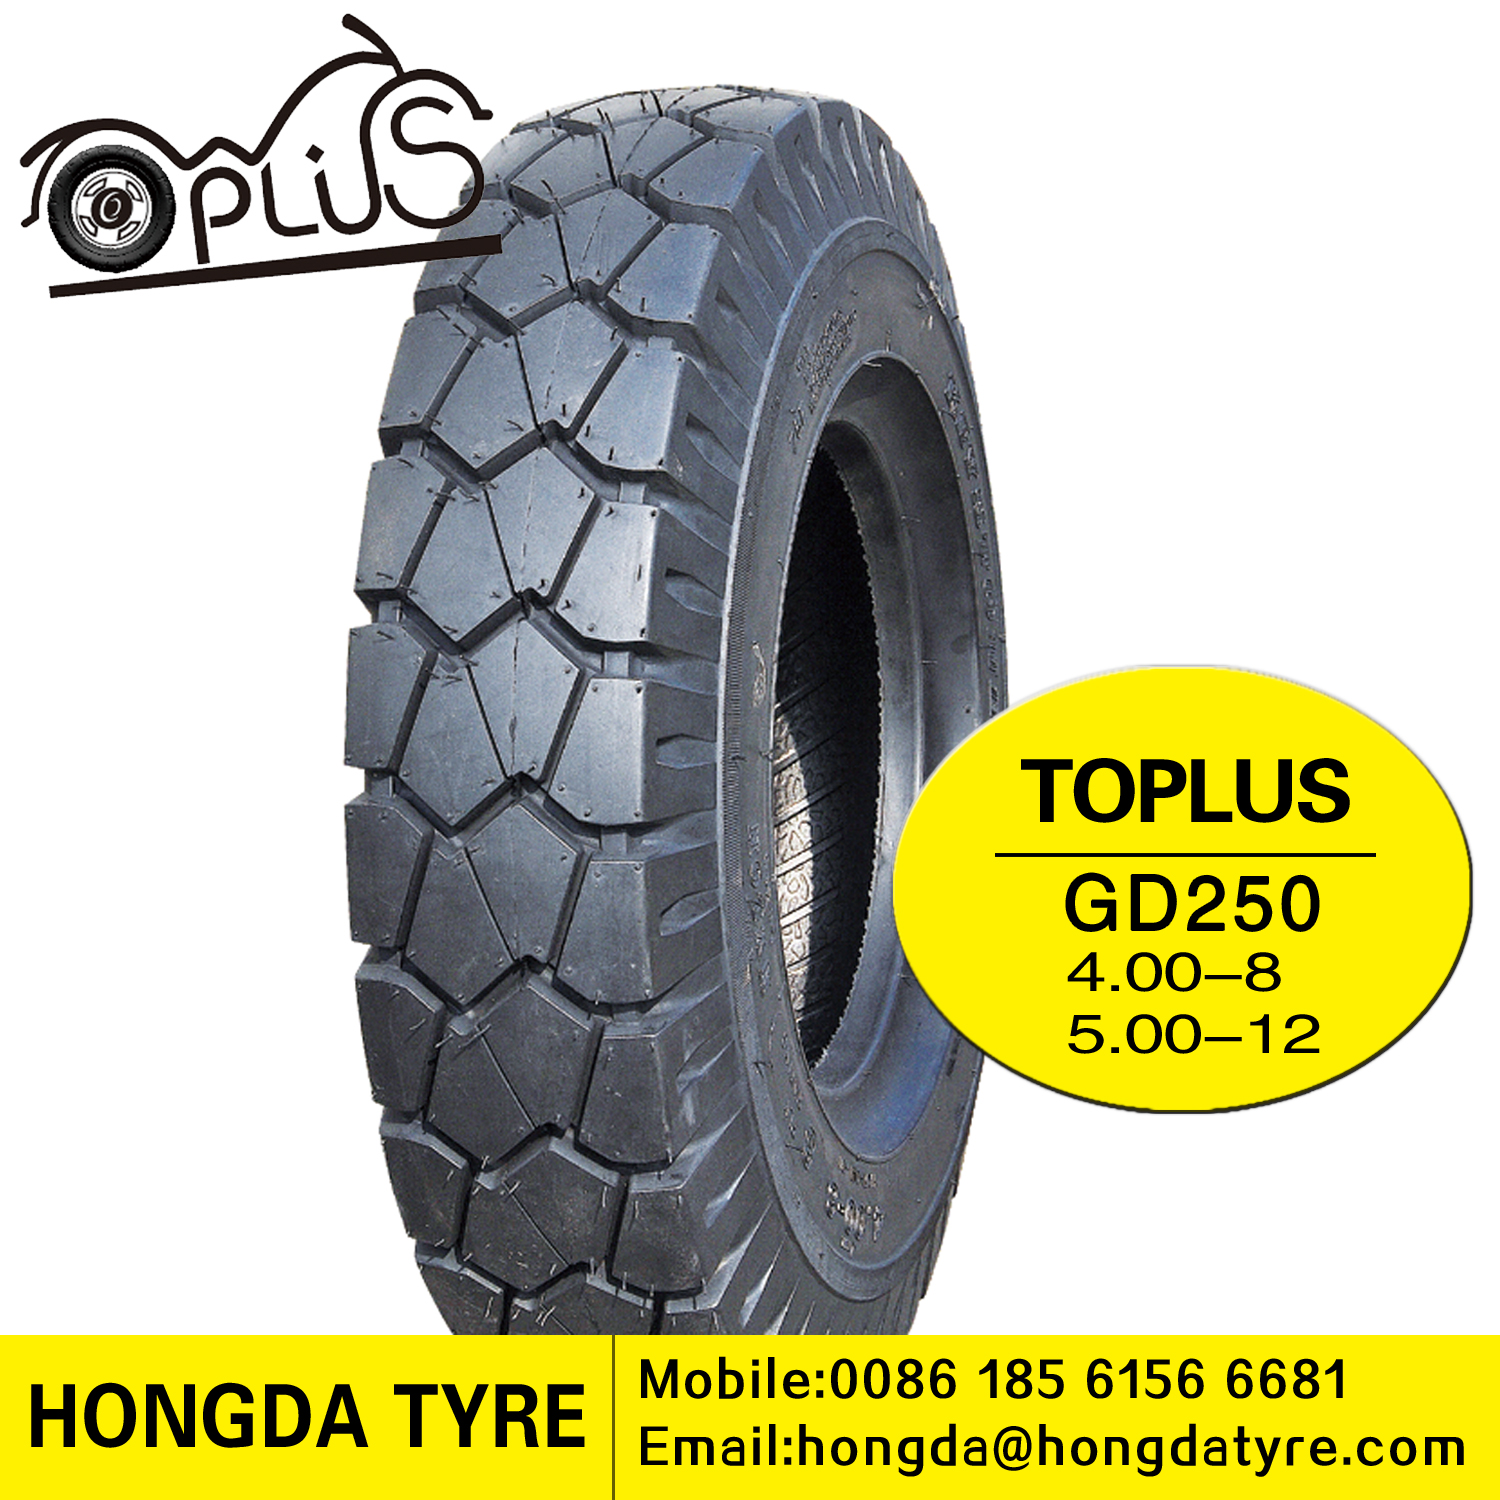 Motorcycle tyre GD250